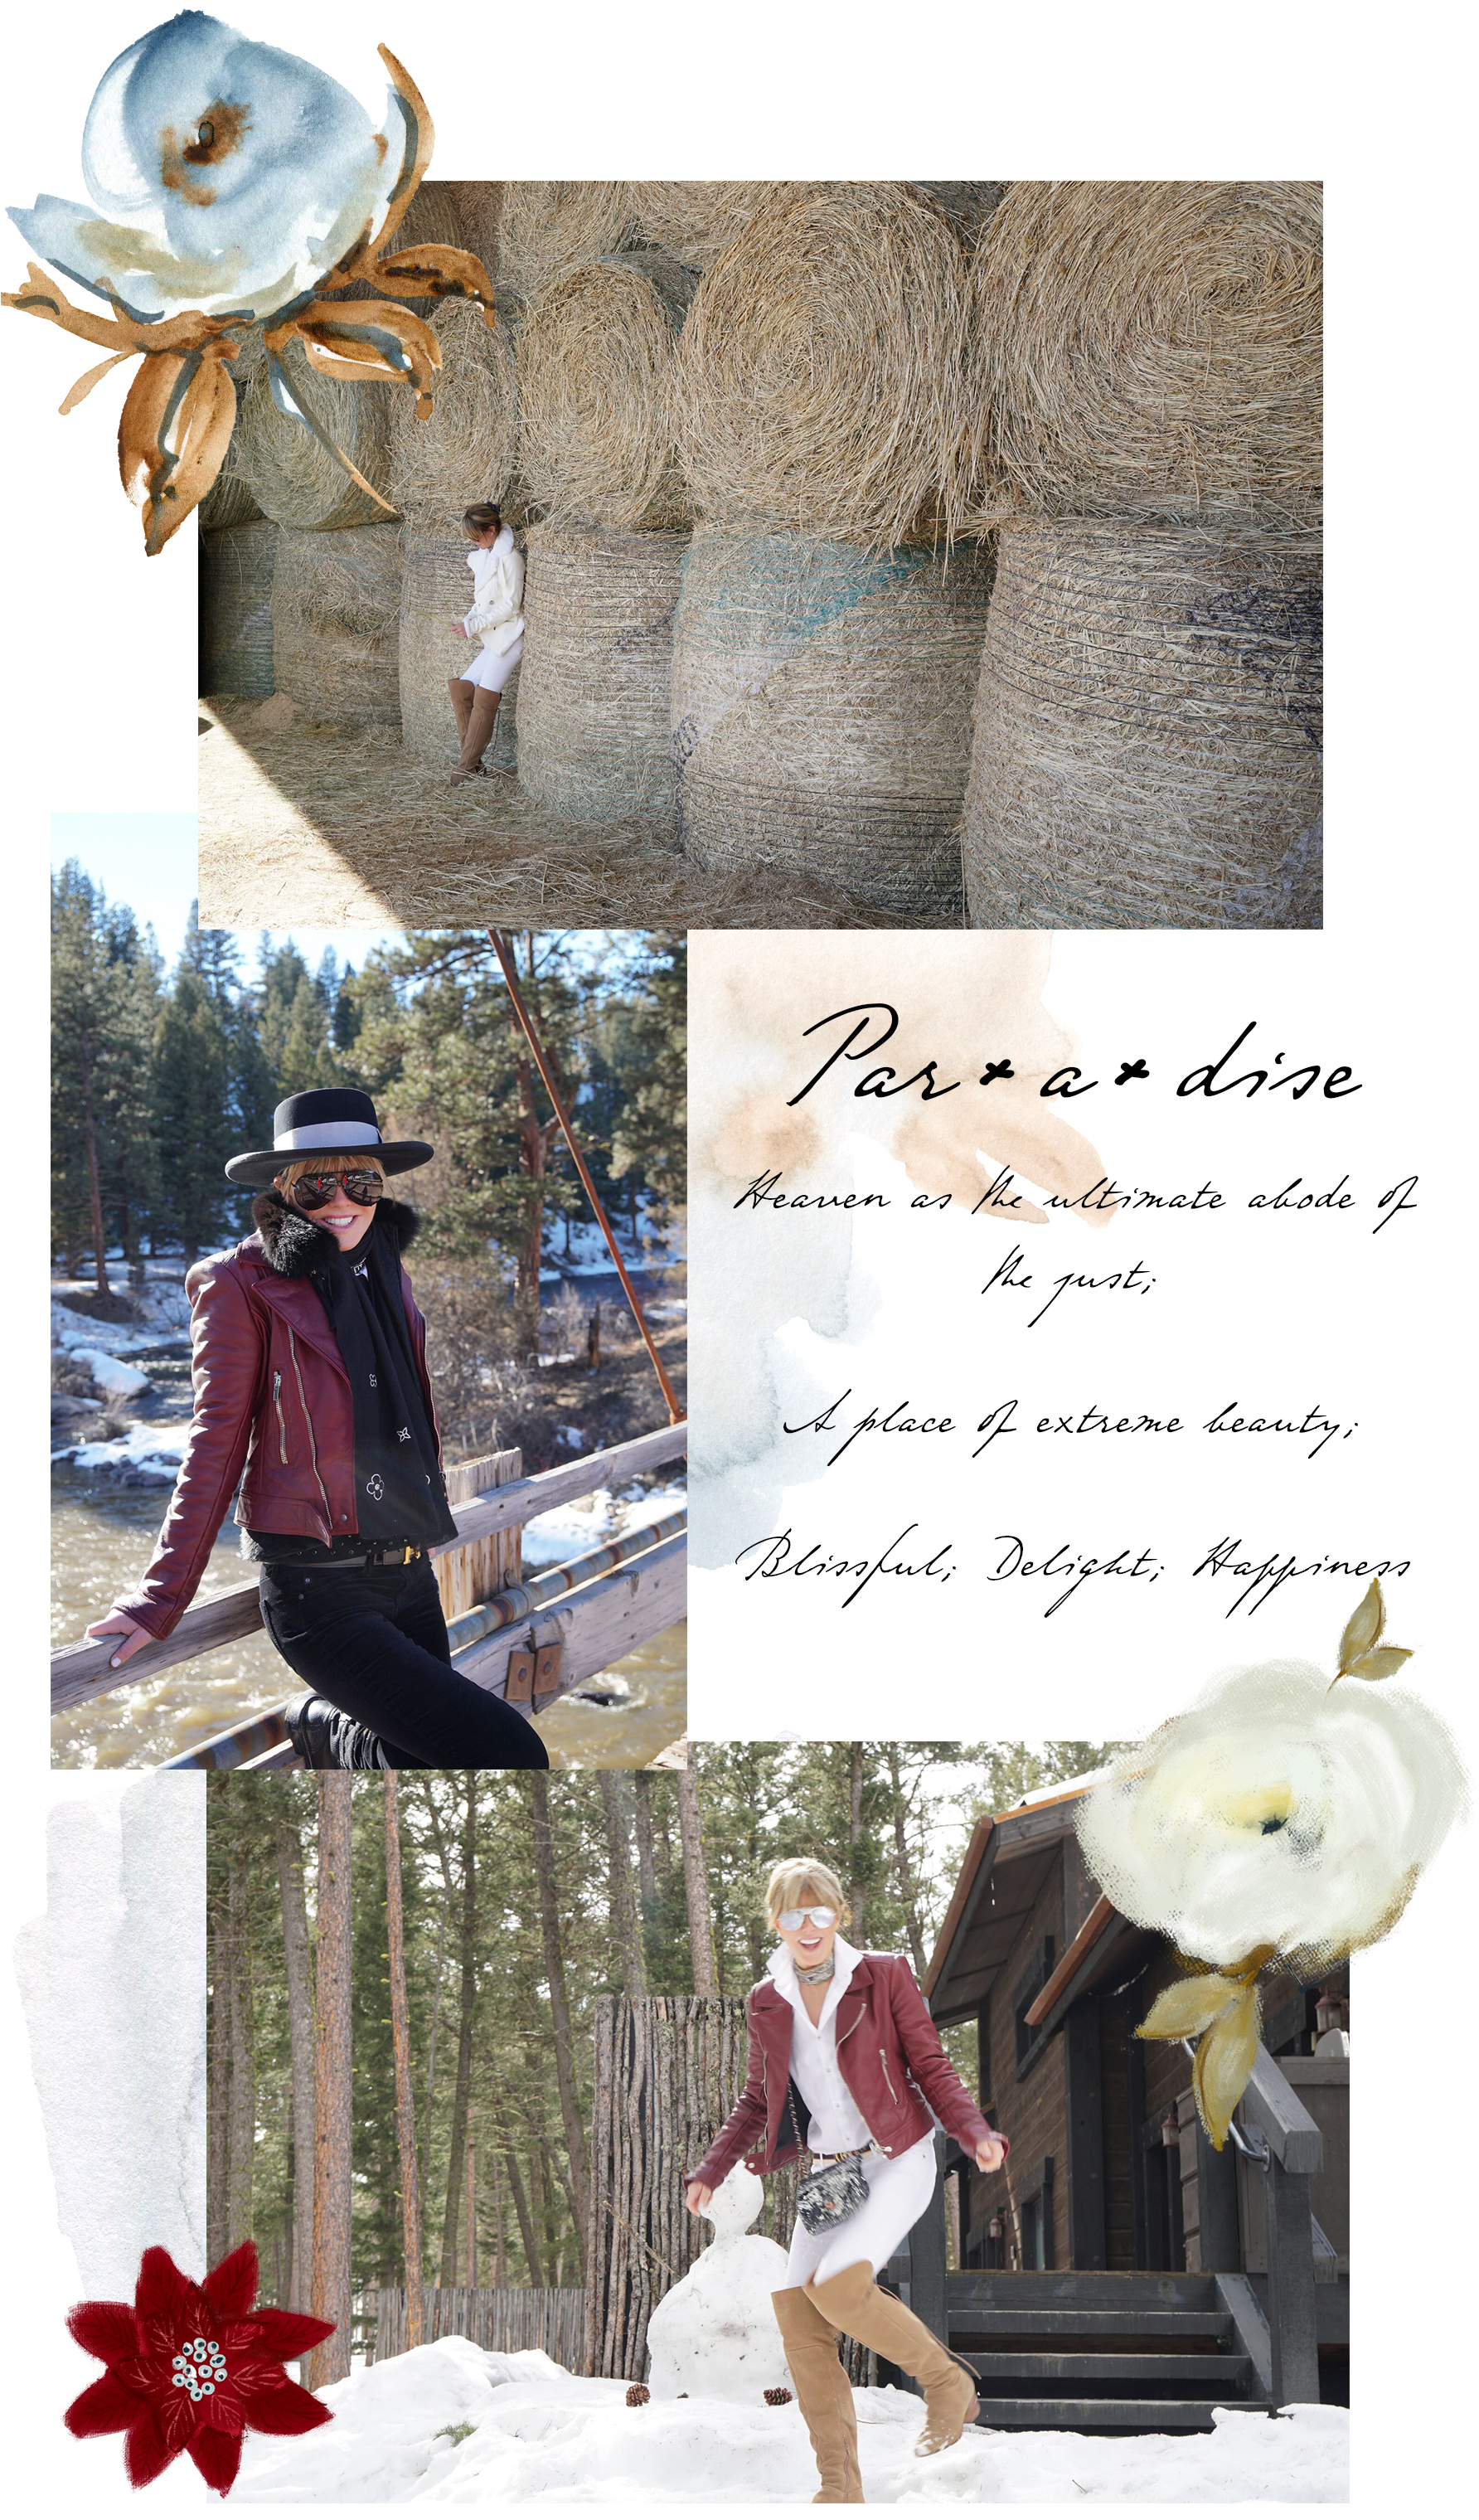 The Resort at Paws Up | Luxury | Glamping | Laura Dunn Fashion